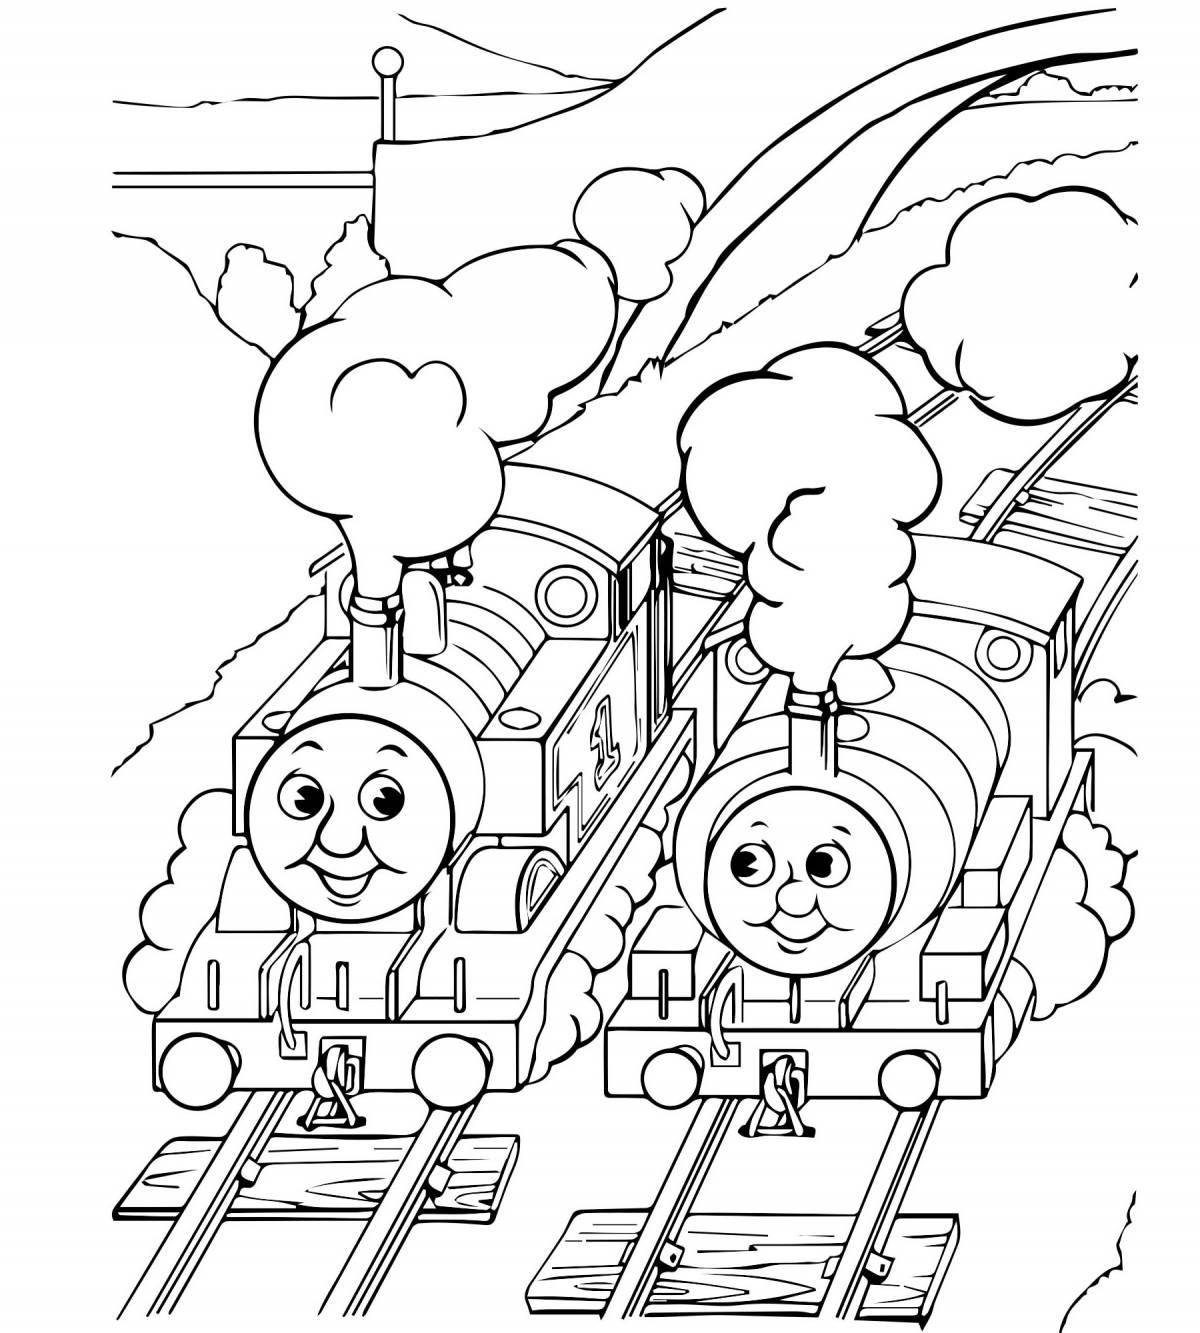 Thomas the Magic Tank Engine coloring pages for kids